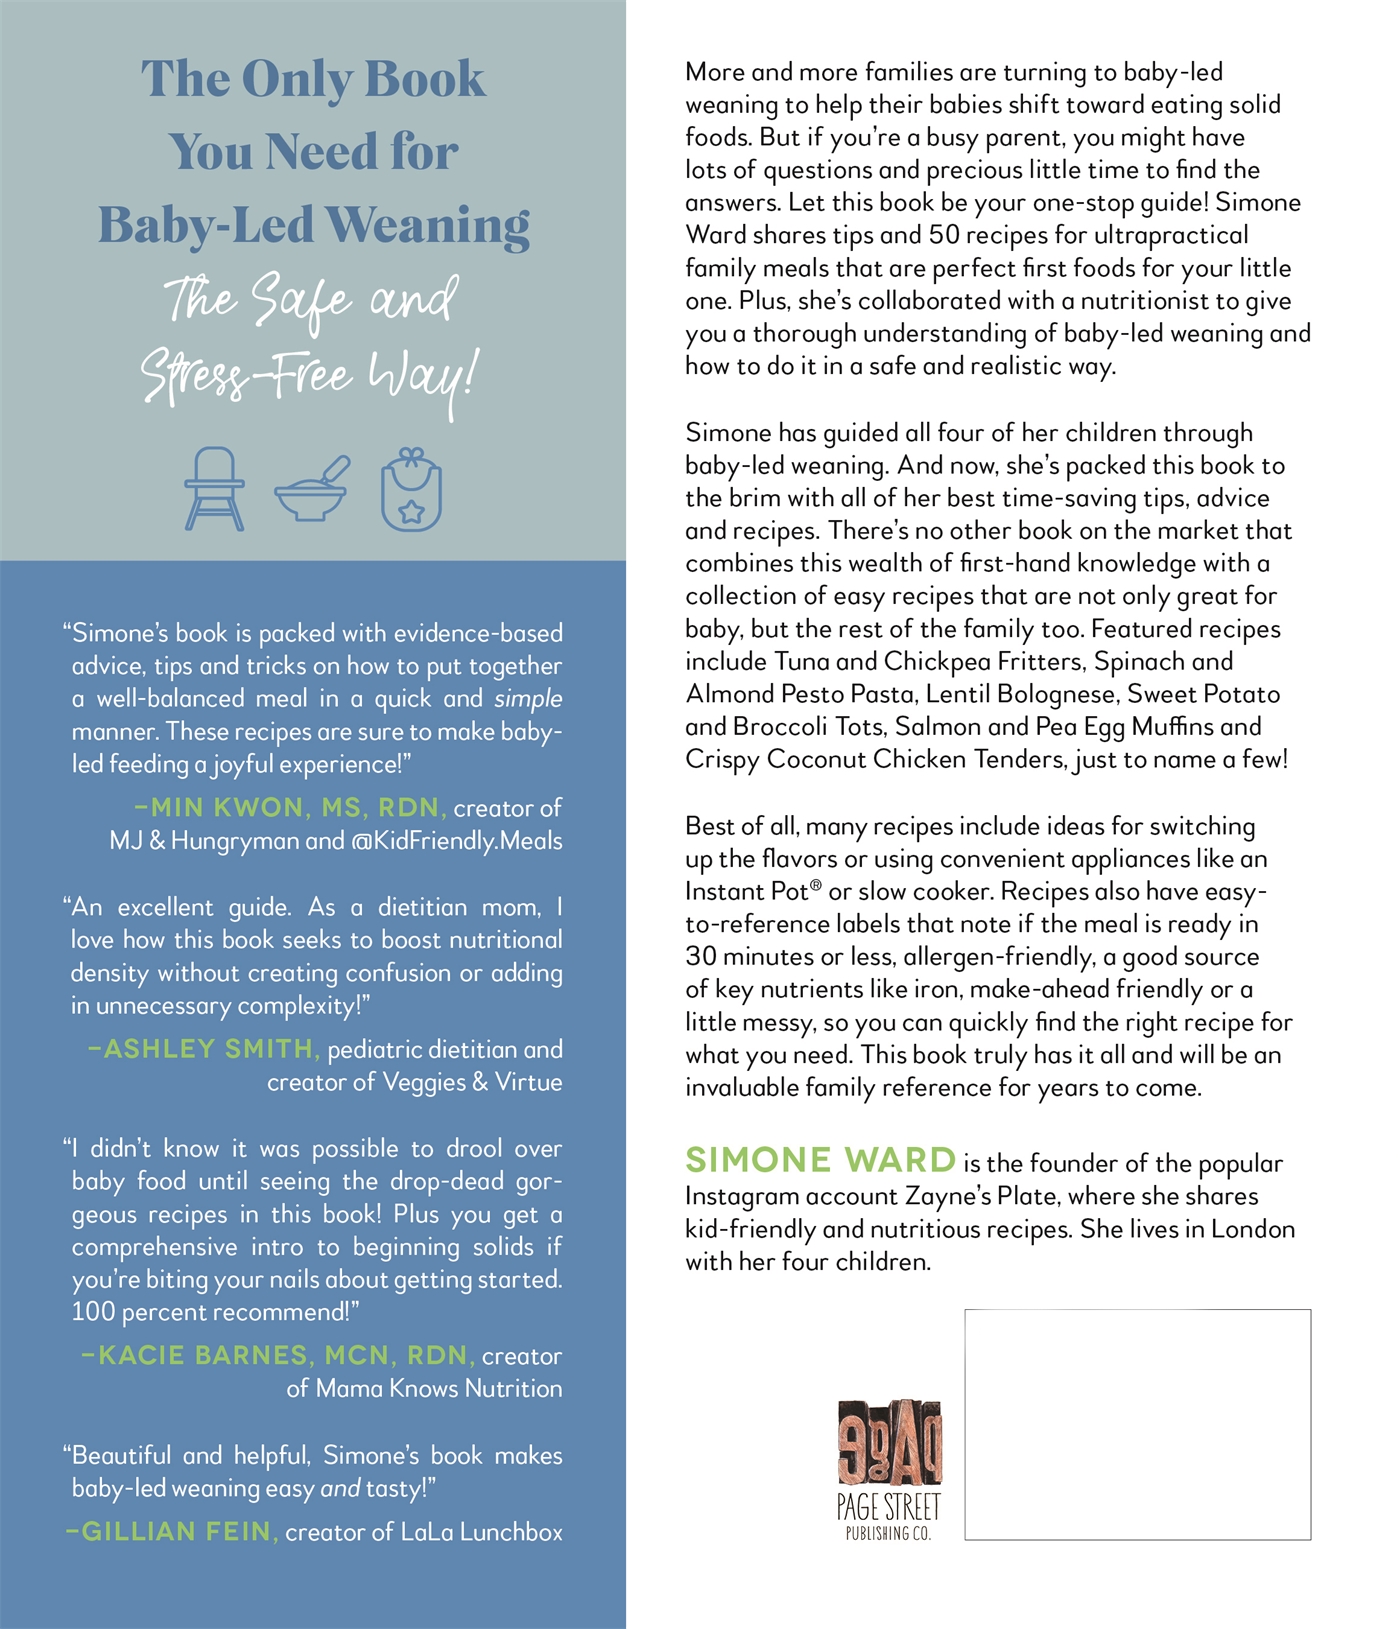 Baby-Led Weaning Made Easy : The Busy Parent's Guide to Feeding Babies and Toddlers With Delicious Family Meals - image 2 of 2